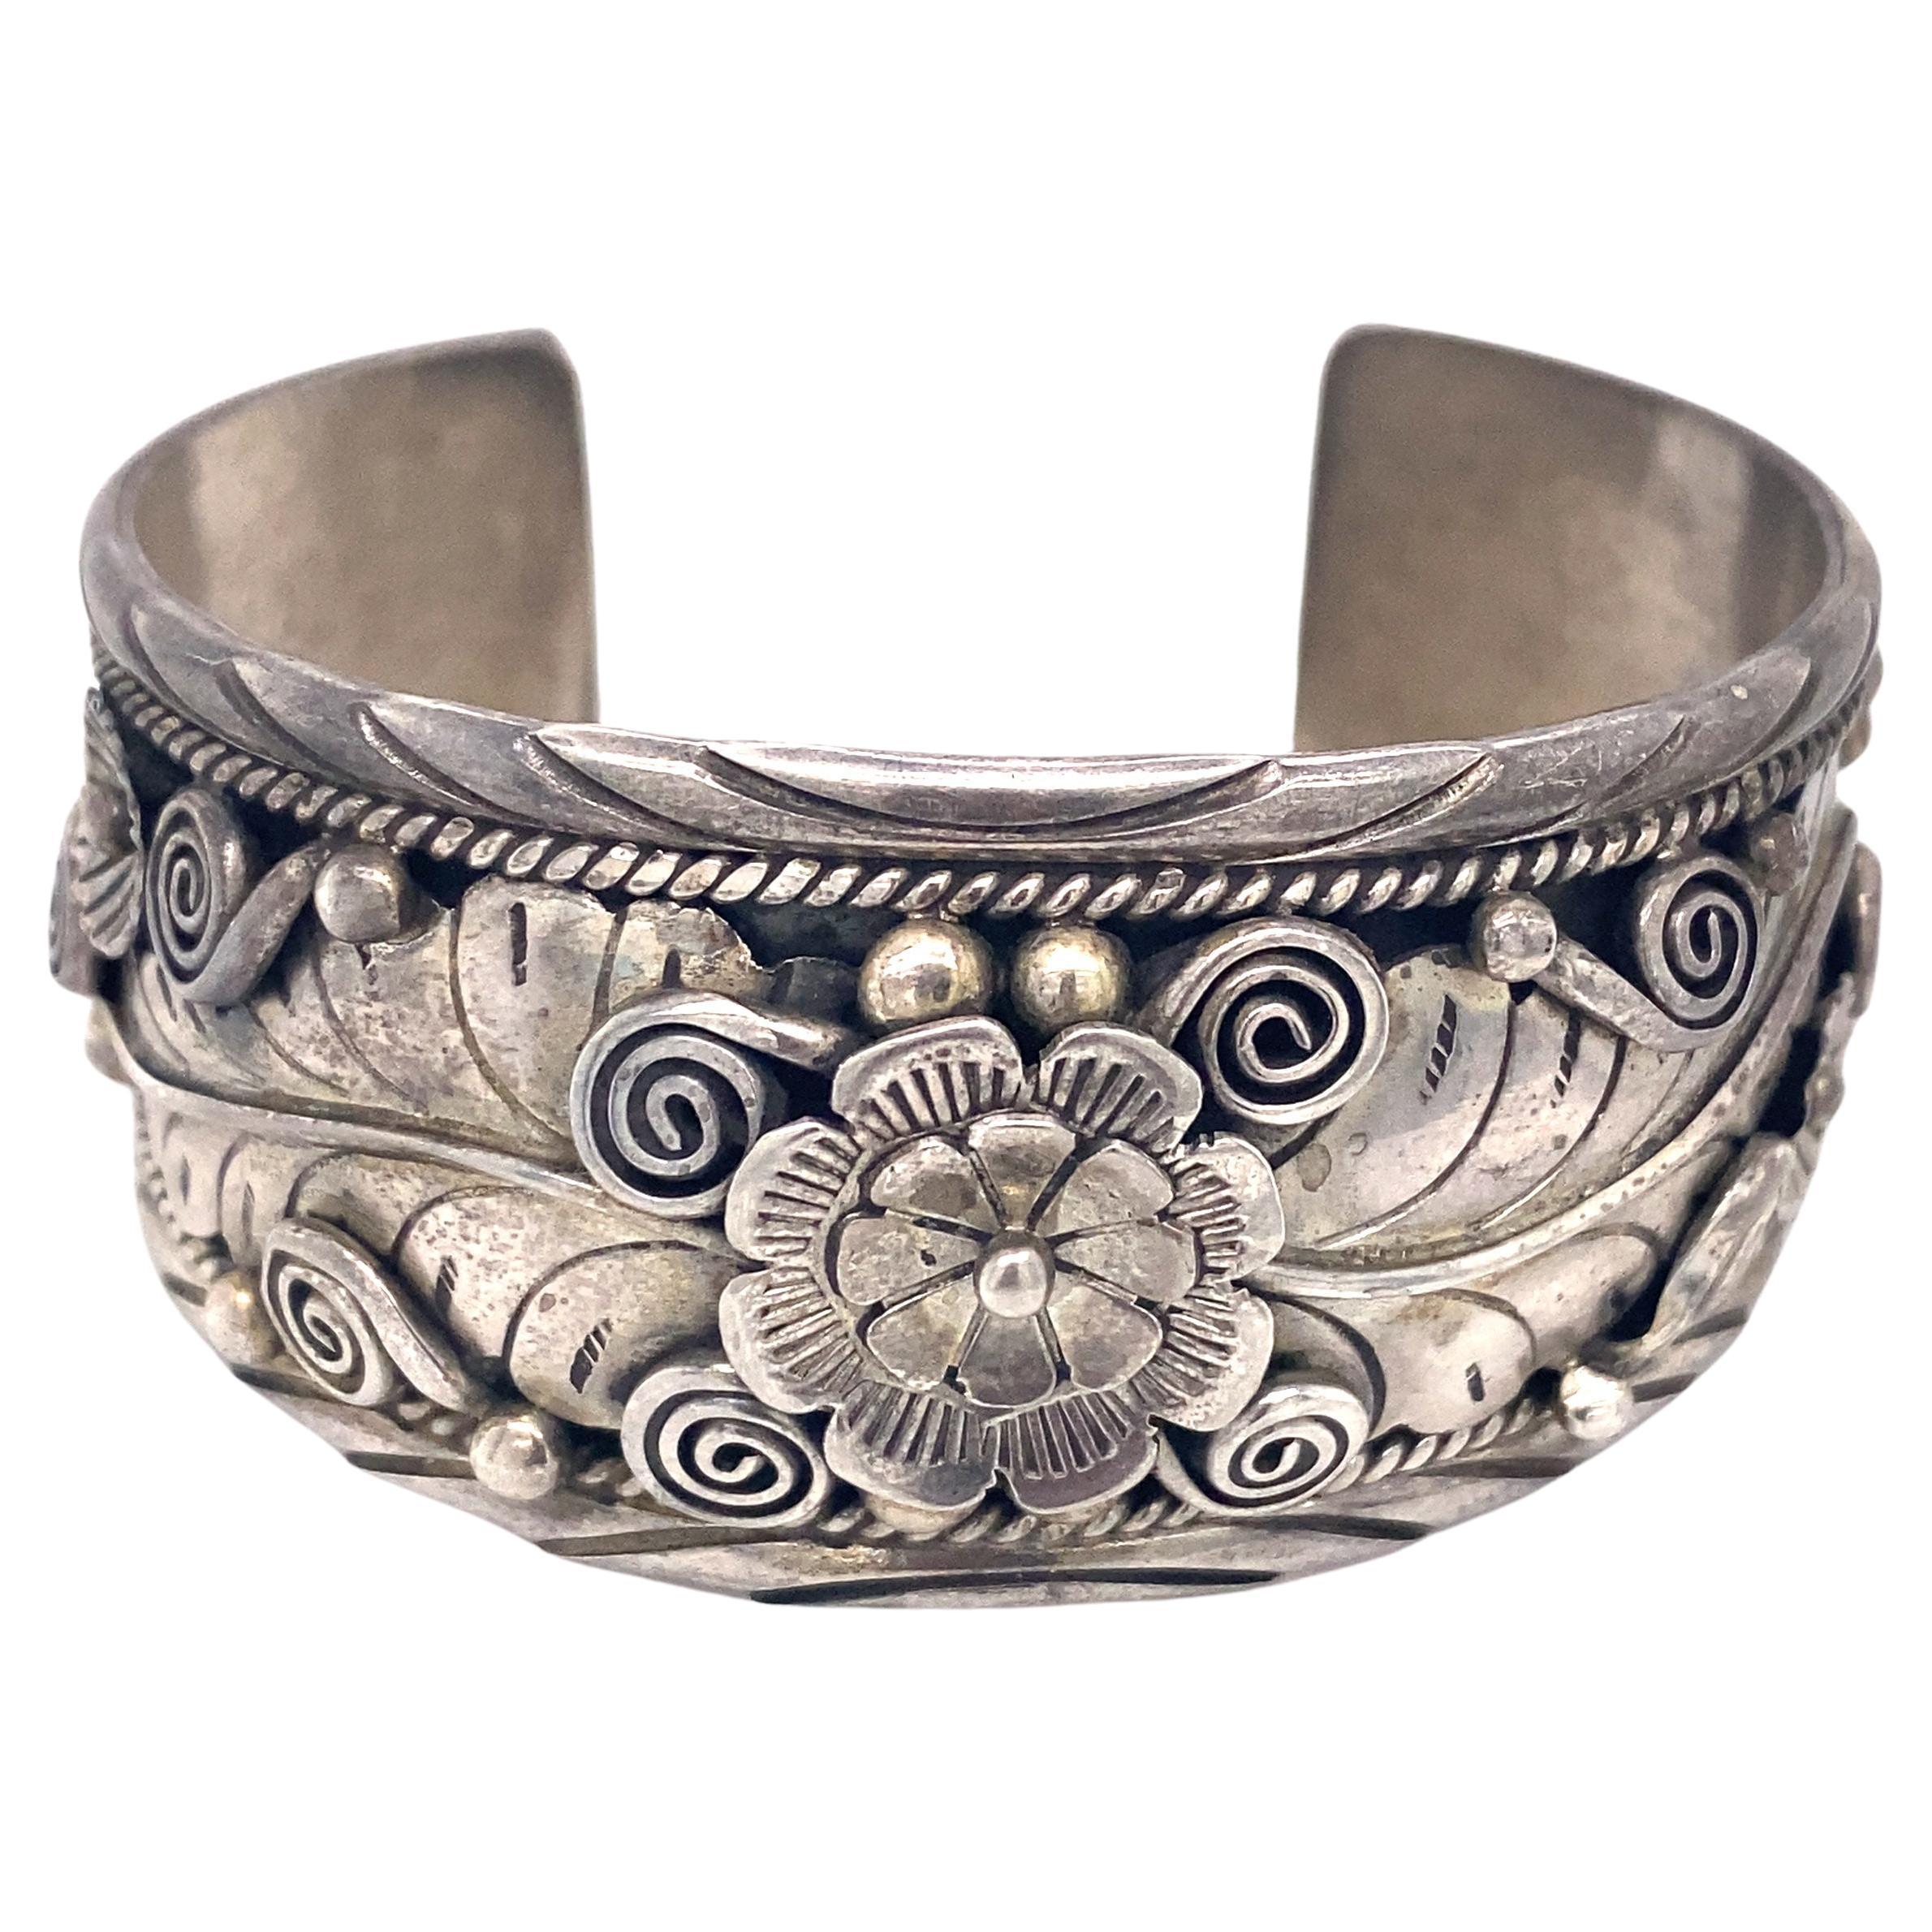 Flower Design Cuff Bracelet in Sterling Silver, Marked Parlos at 1stDibs